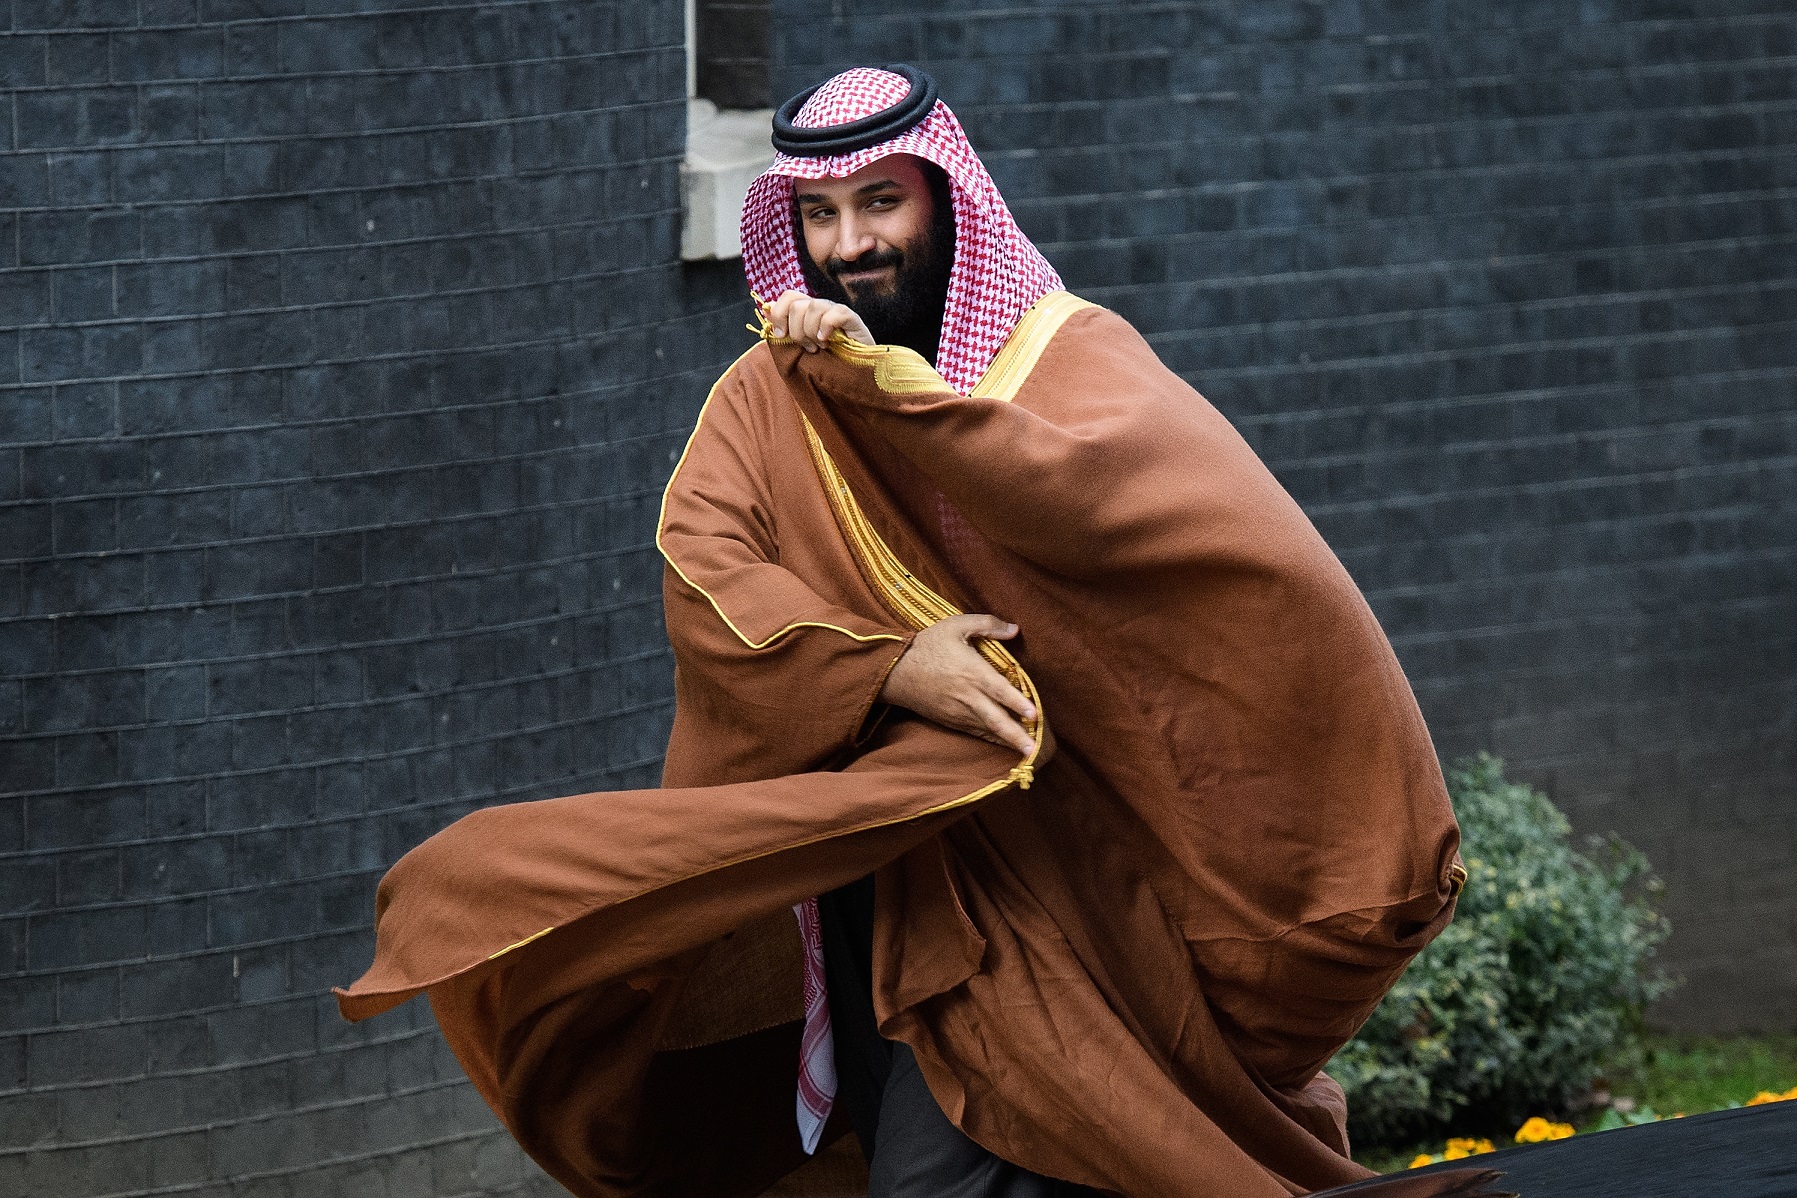 LONDON, ENGLAND - MARCH 07:  Saudi Crown Prince Mohammed bin Salman arrives for a meeting with British Prime Minister Theresa May (not pictured) in number 10 Downing Street on March 7, 2018 in London, England. Saudi Crown Prince Mohammed bin Salman has made wide-ranging changes at home supporting a more liberal Islam. Whilst visiting the UK he will meet with several members of the Royal family and the Prime Minister.  (Photo by Leon Neal/Getty Images)